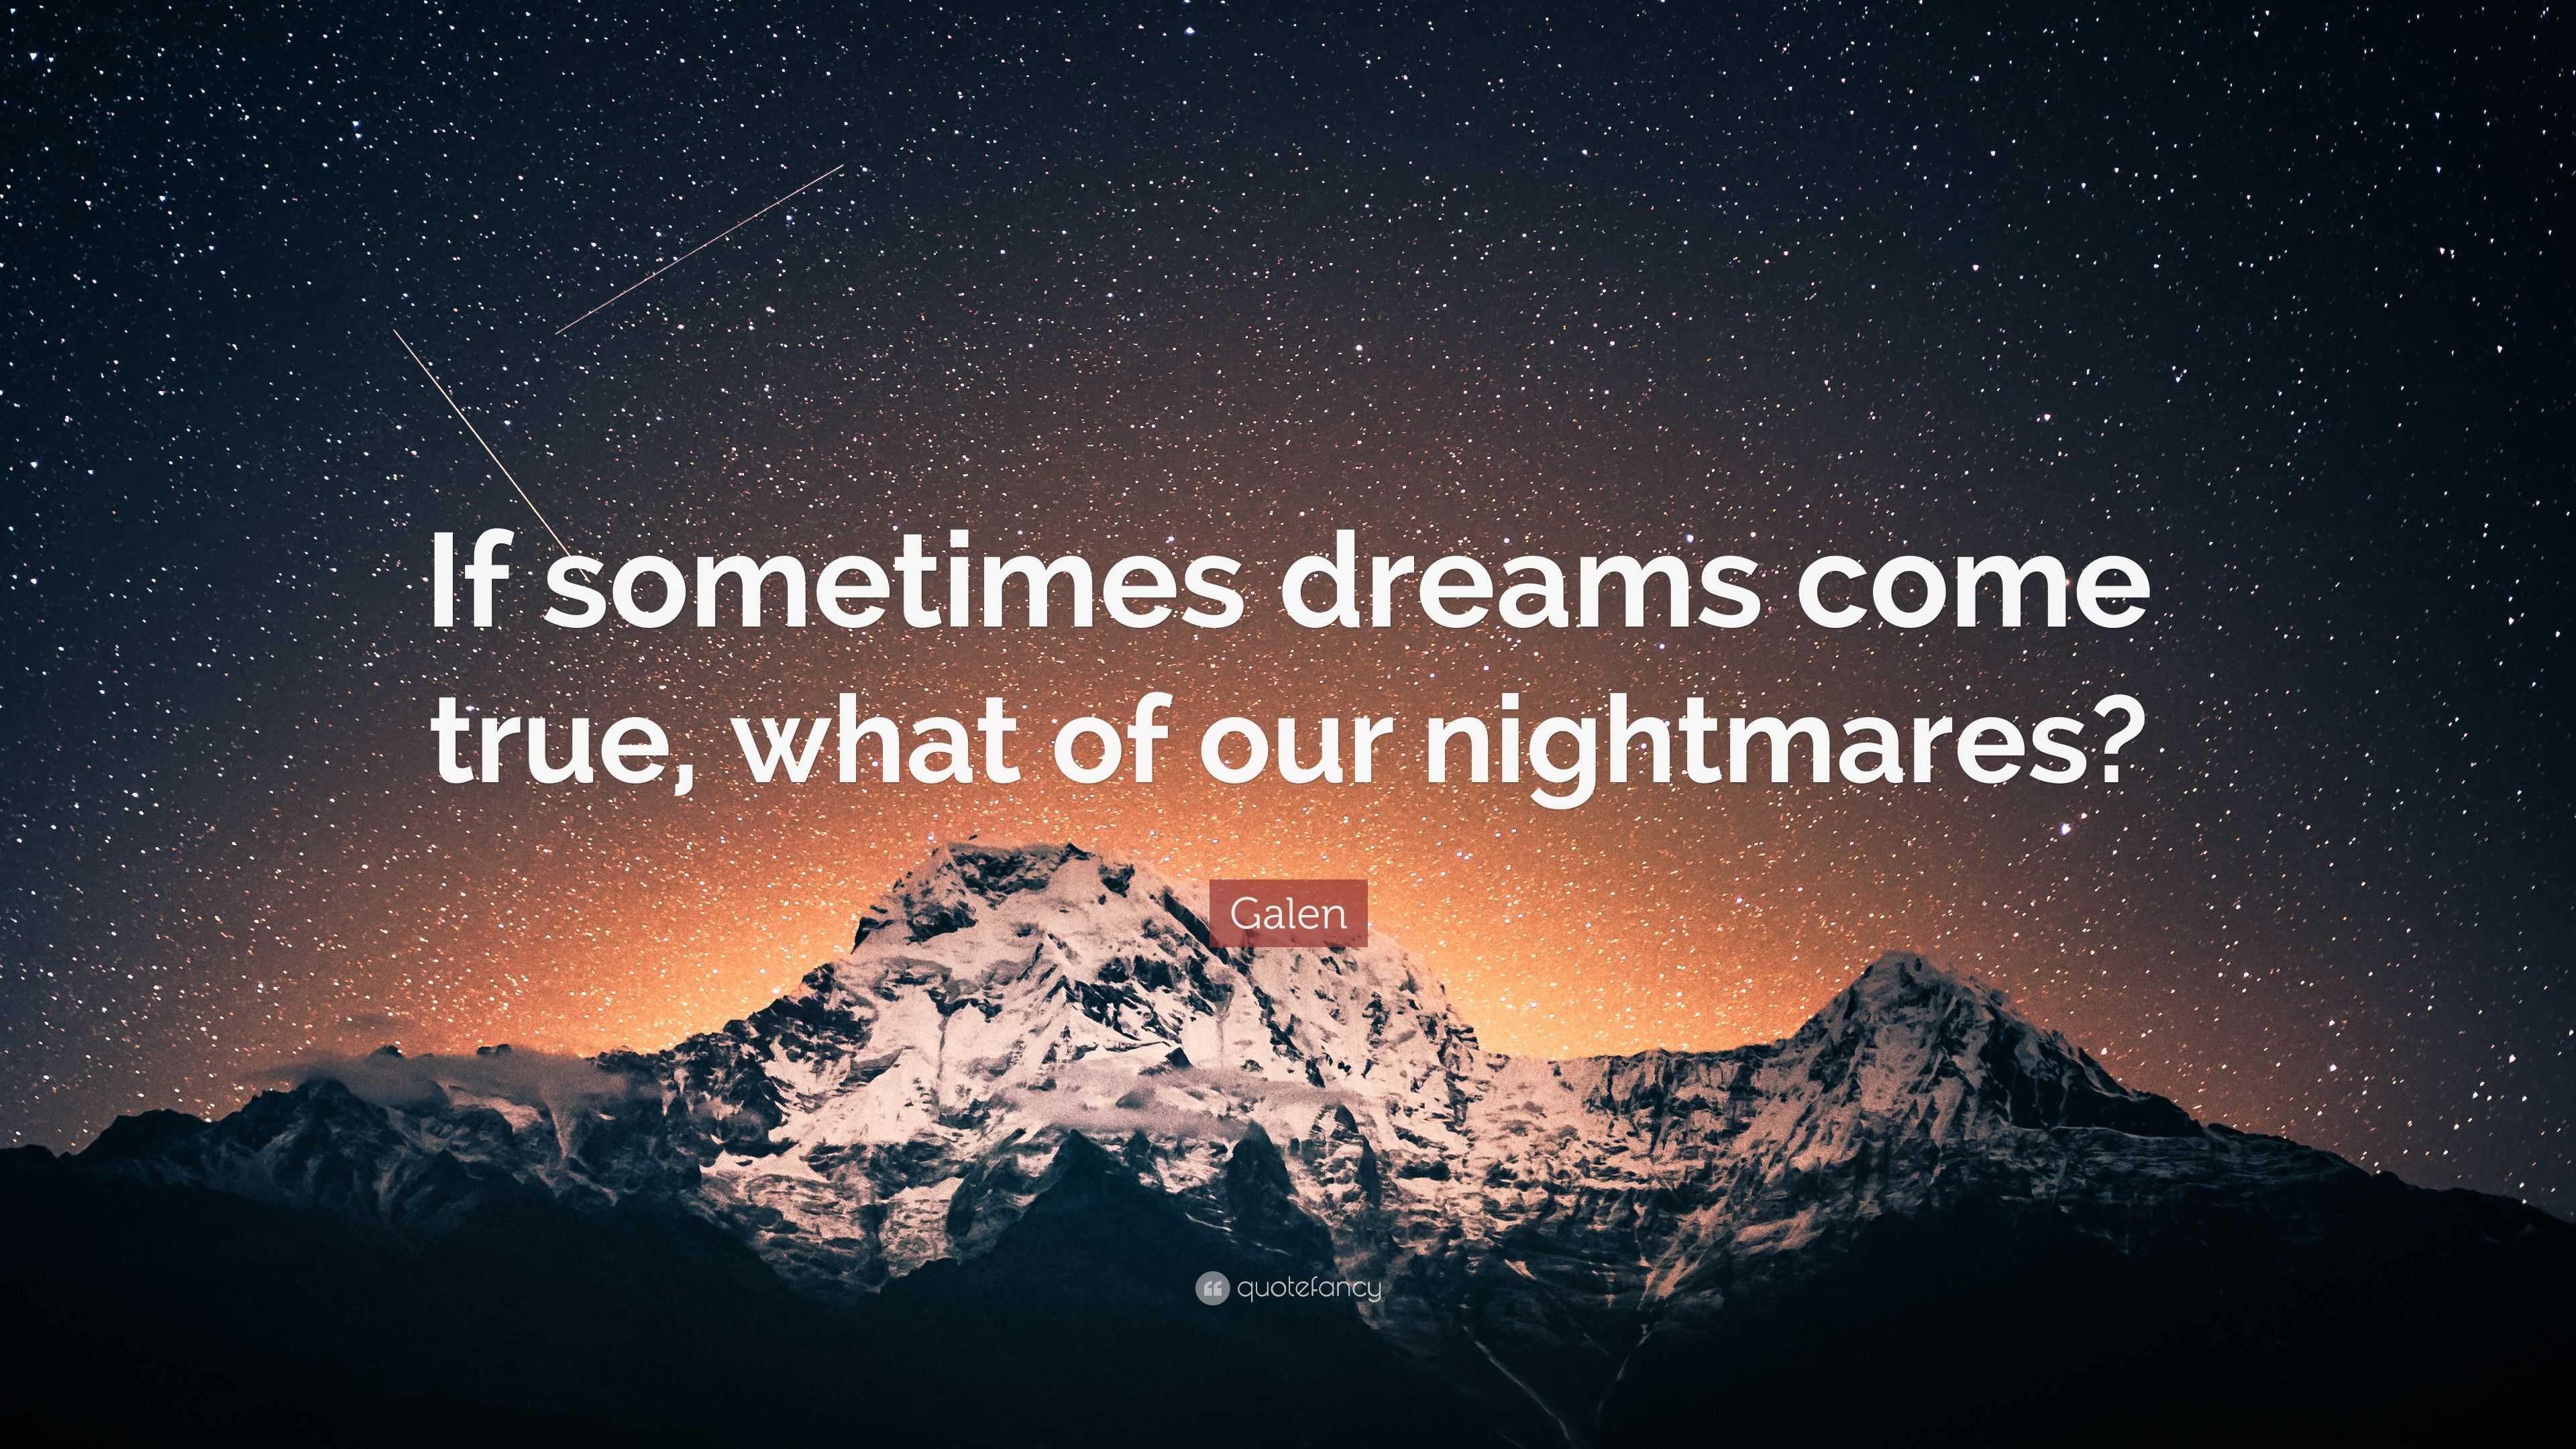 Galen Quote: “If sometimes dreams come true, what of our nightmares?”